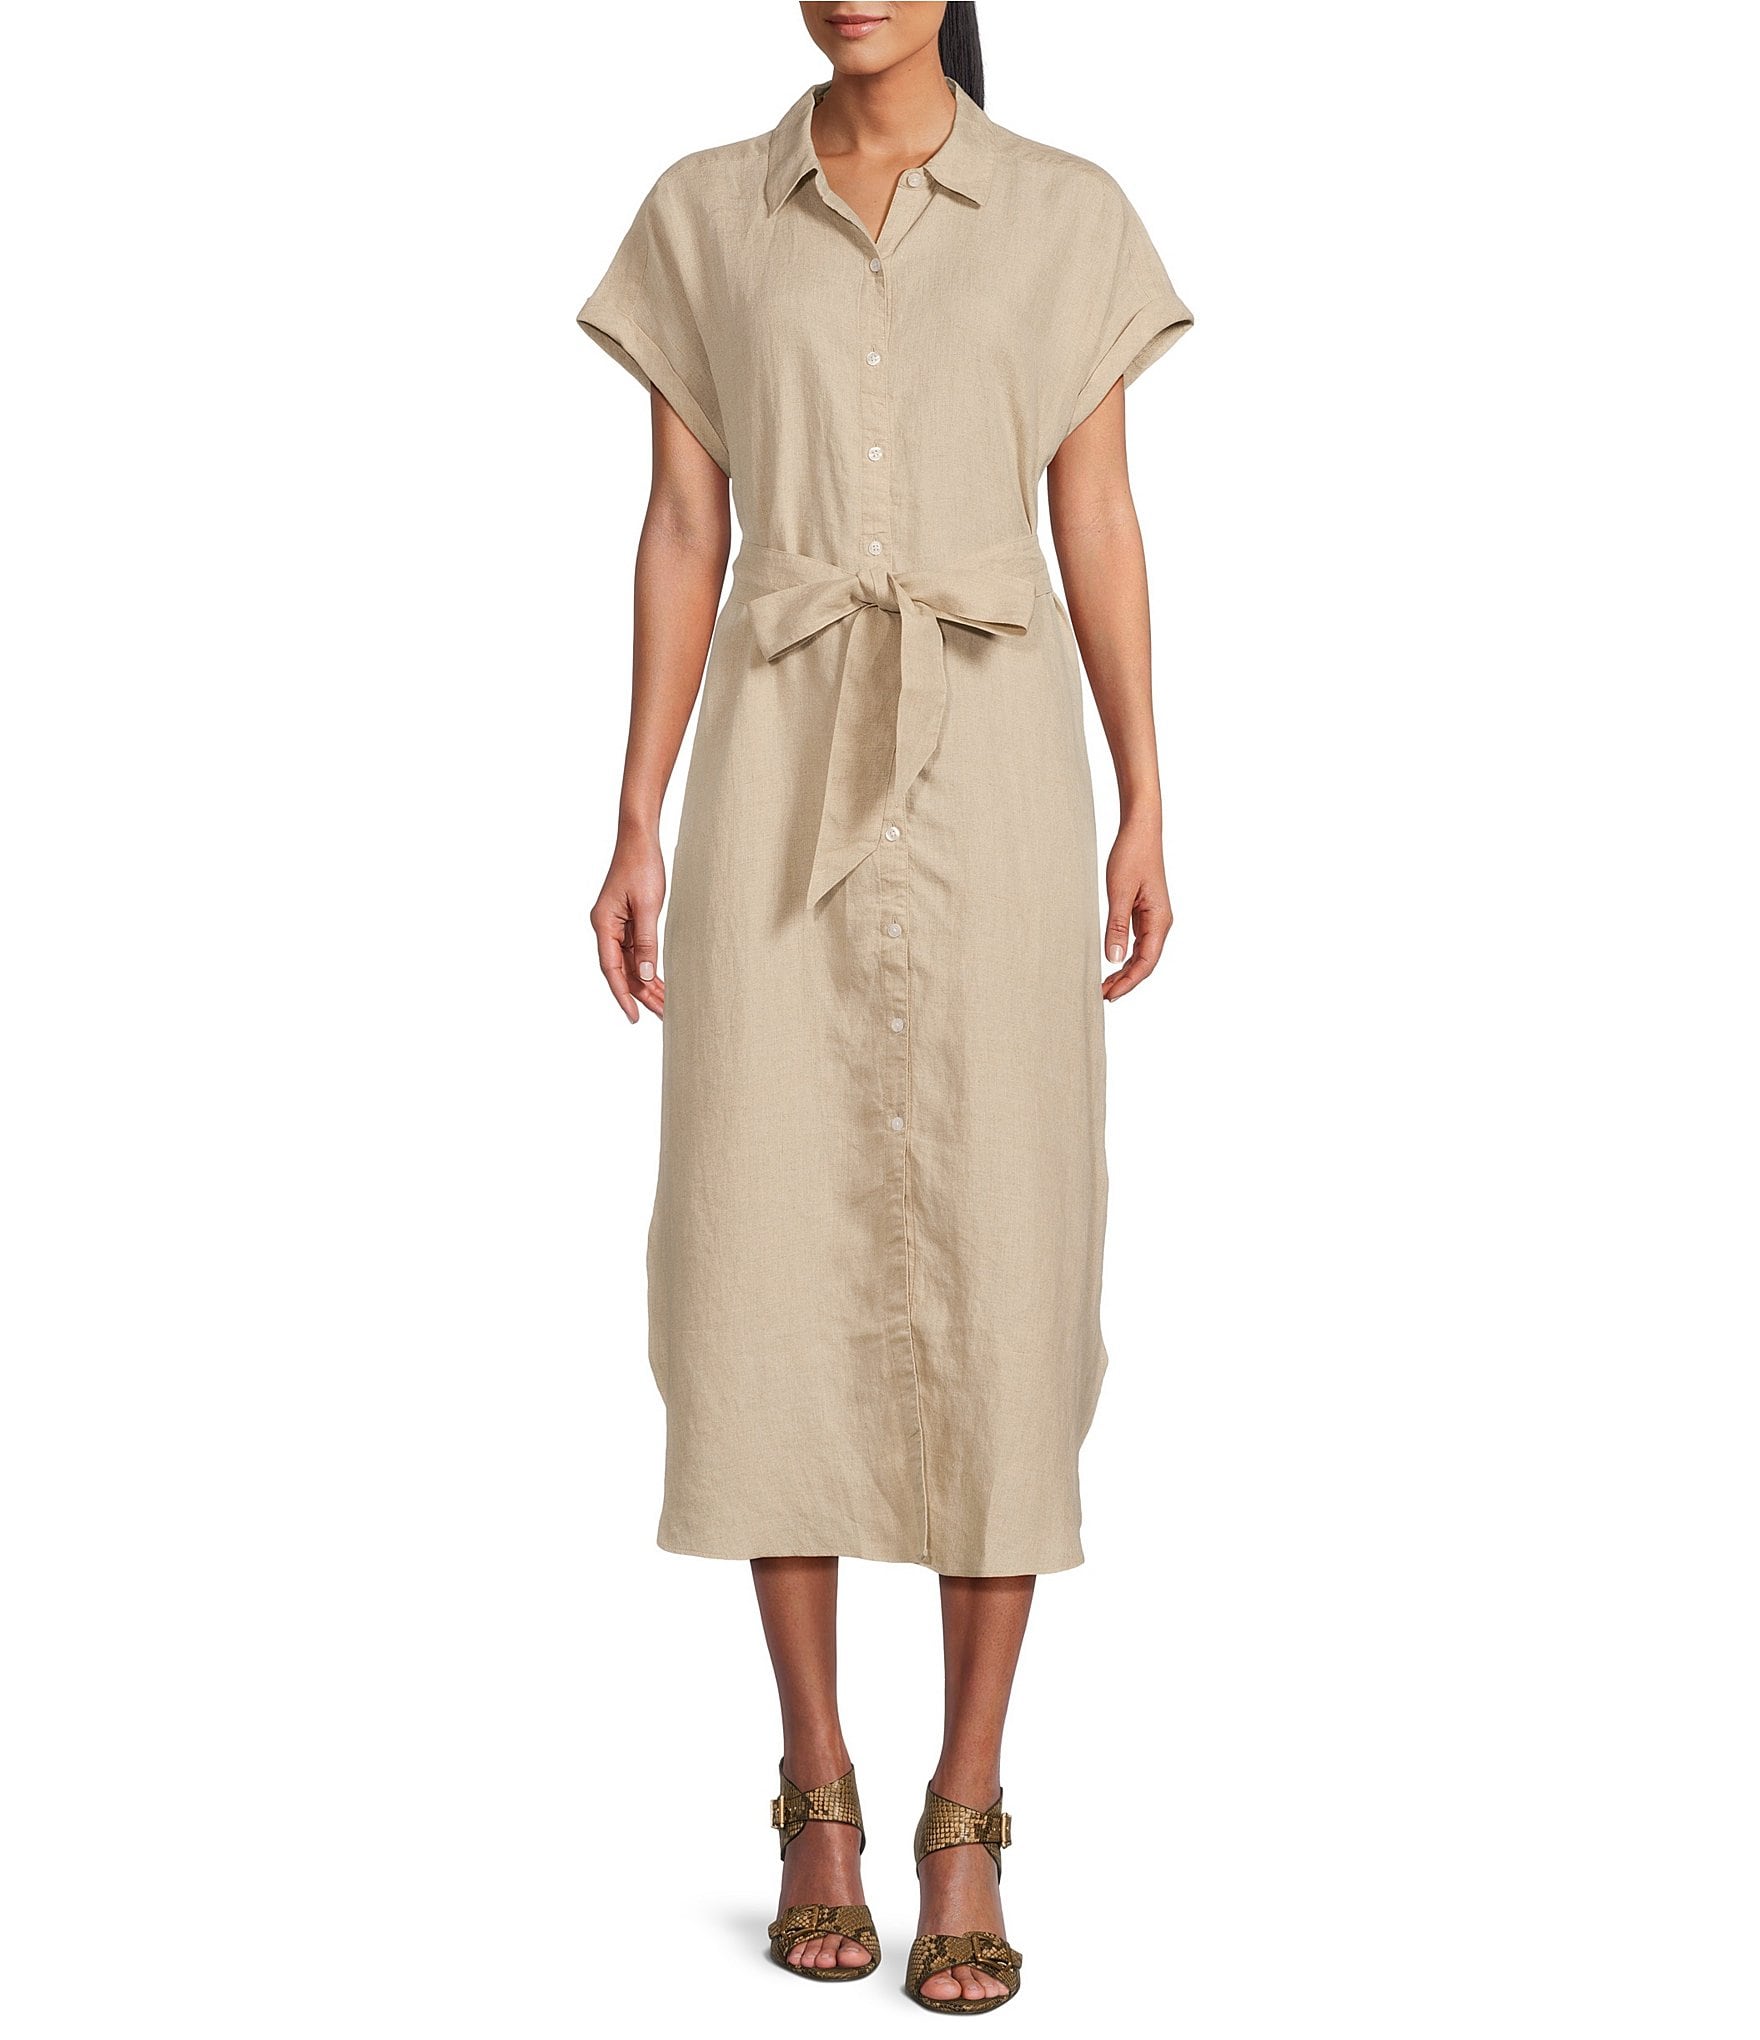 Linen Shift Dress With 3/4 Sleeves, Midi Linen Dress With Pockets